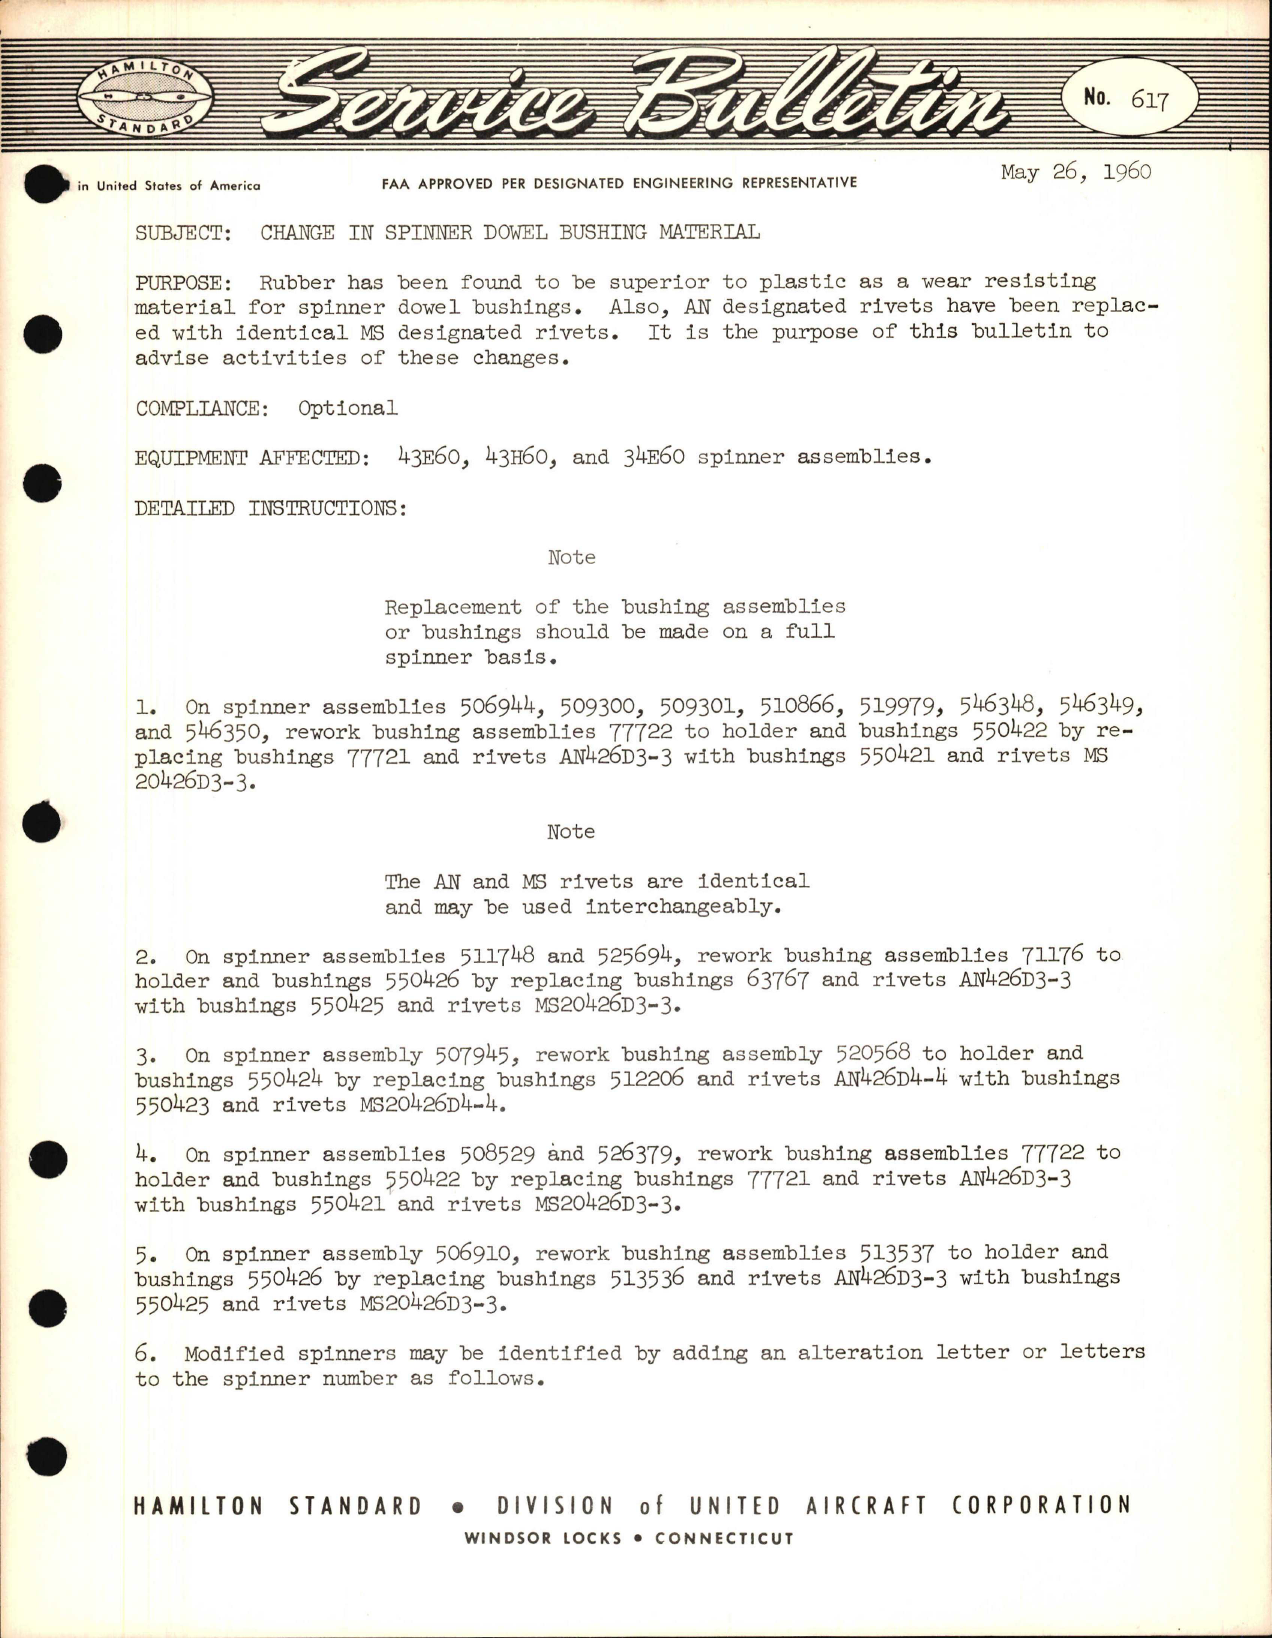 Sample page 1 from AirCorps Library document: Change in Spinner Dowel Bushing Material